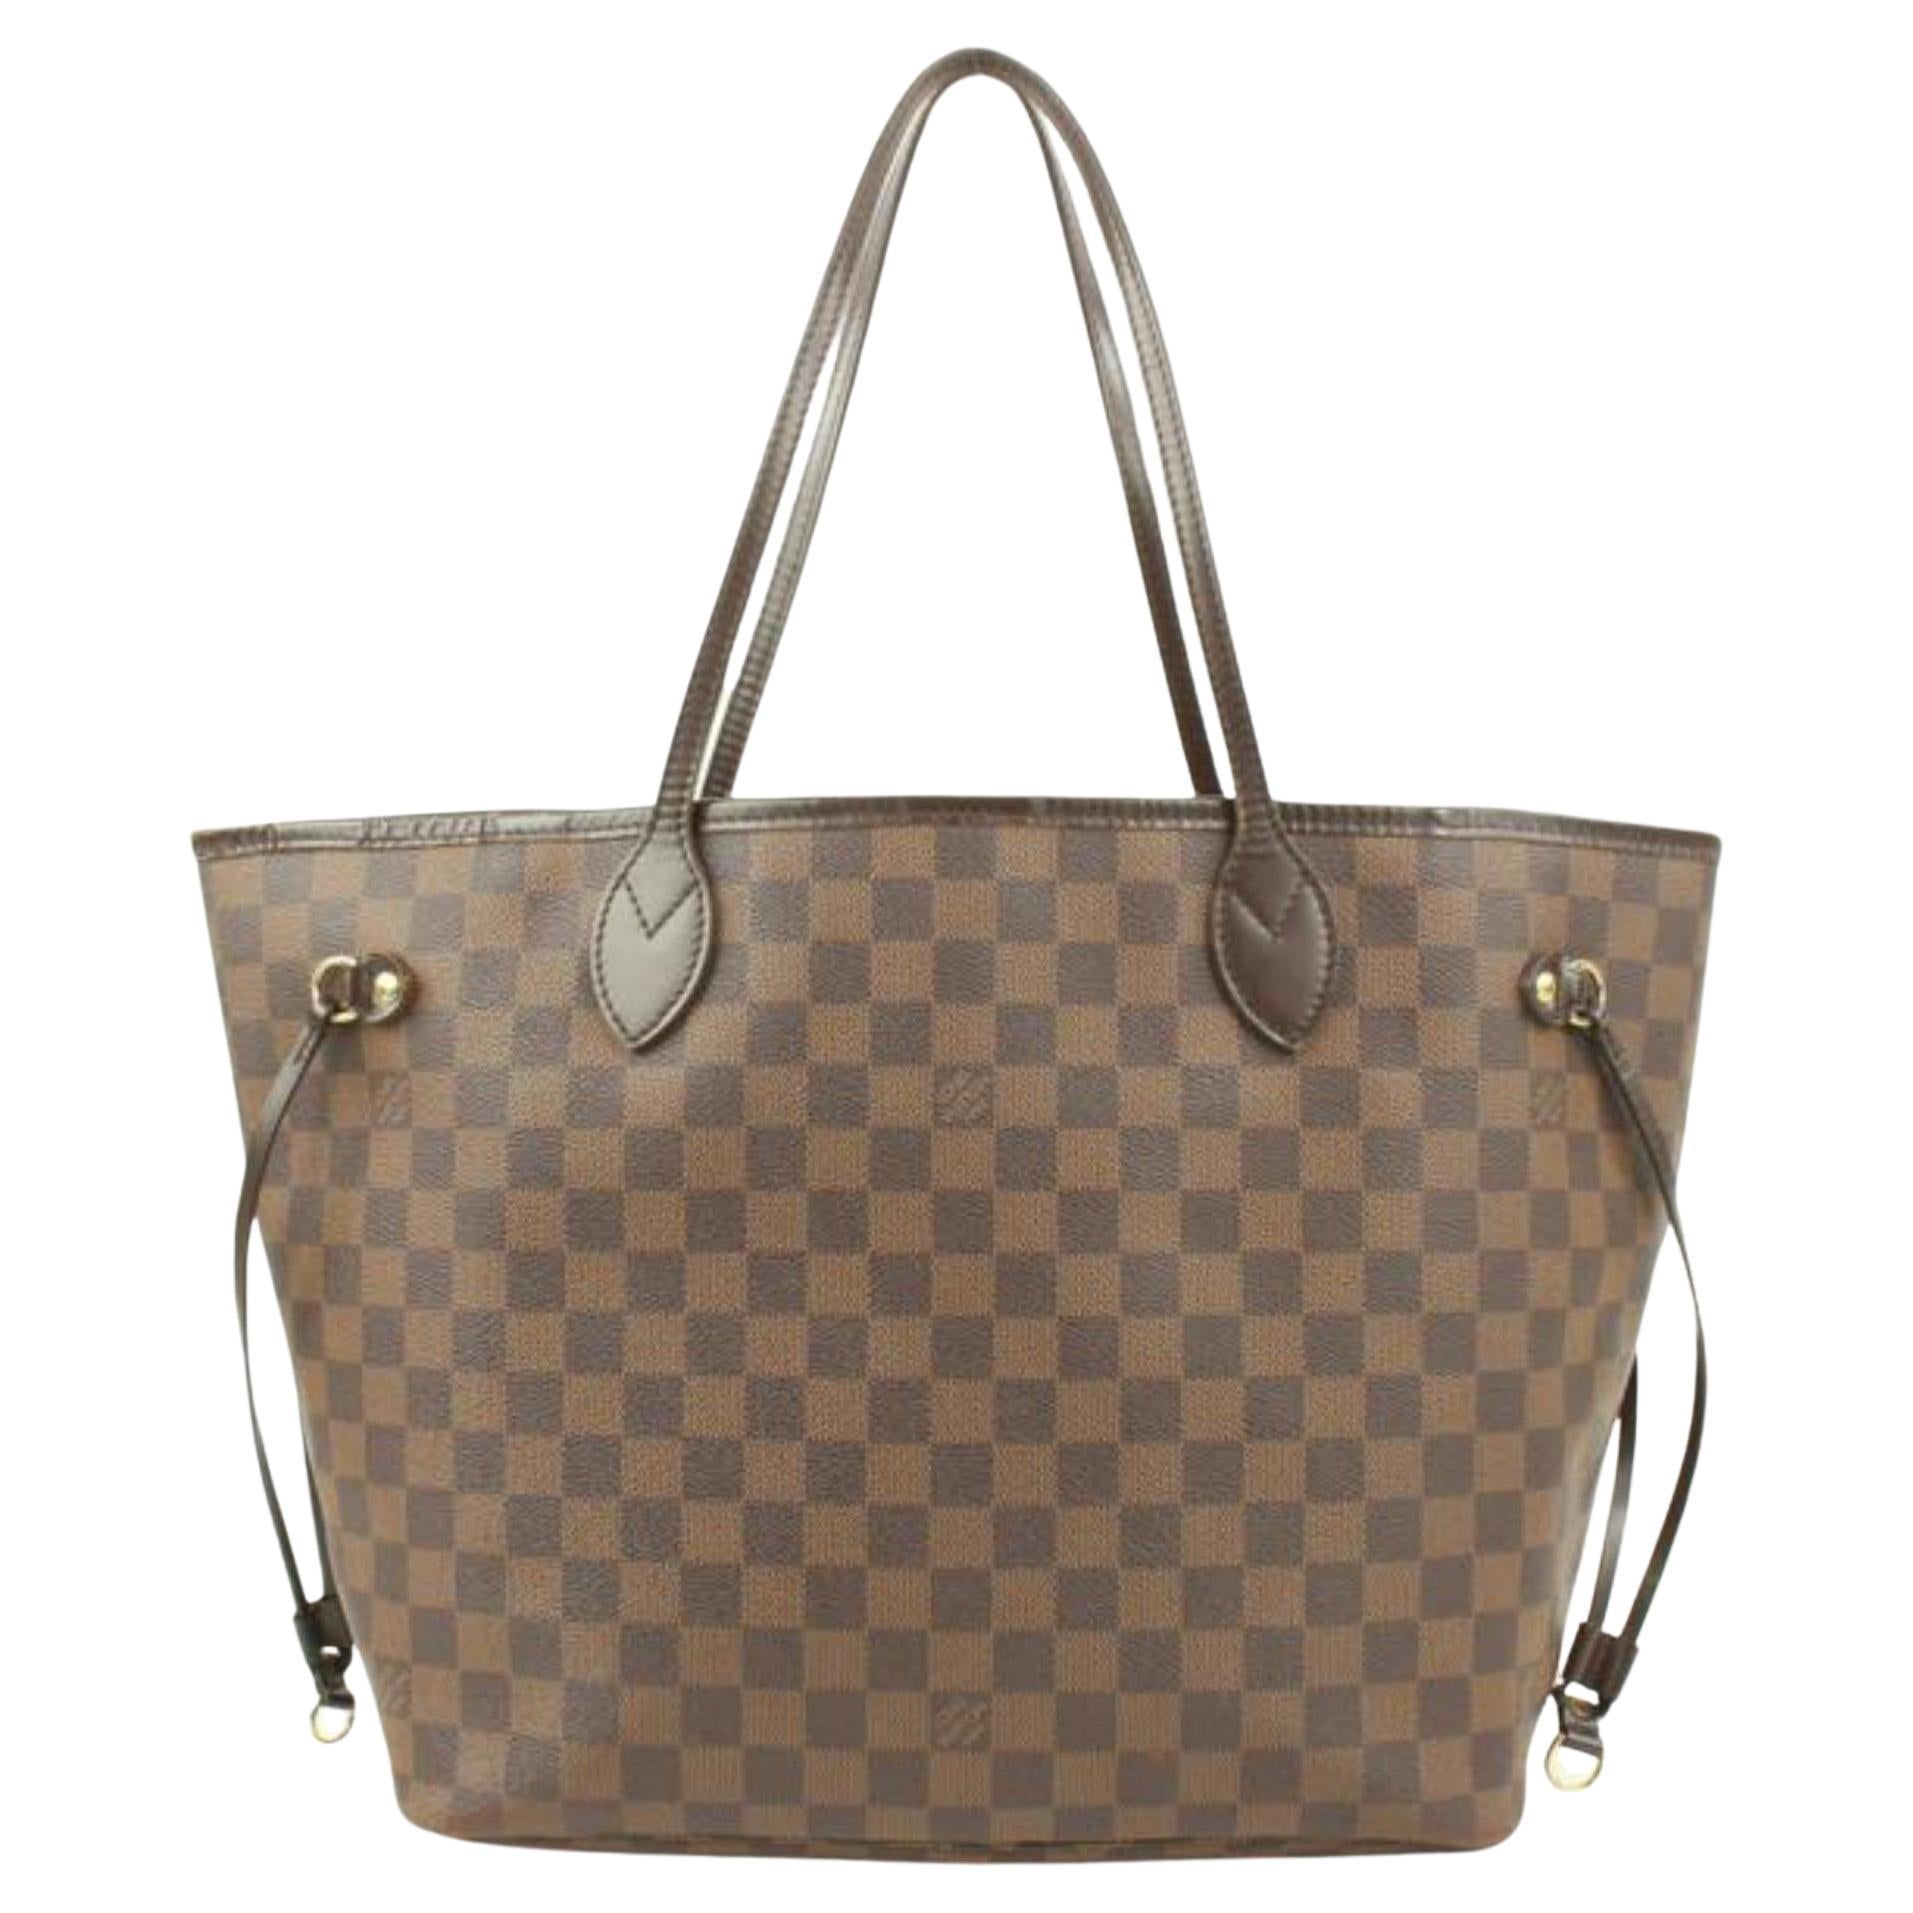 Sold at Auction: Louis Brown, Louis Vuitton - Neverfull PM Small Tote Bag -  Damier Brown - Red Interior